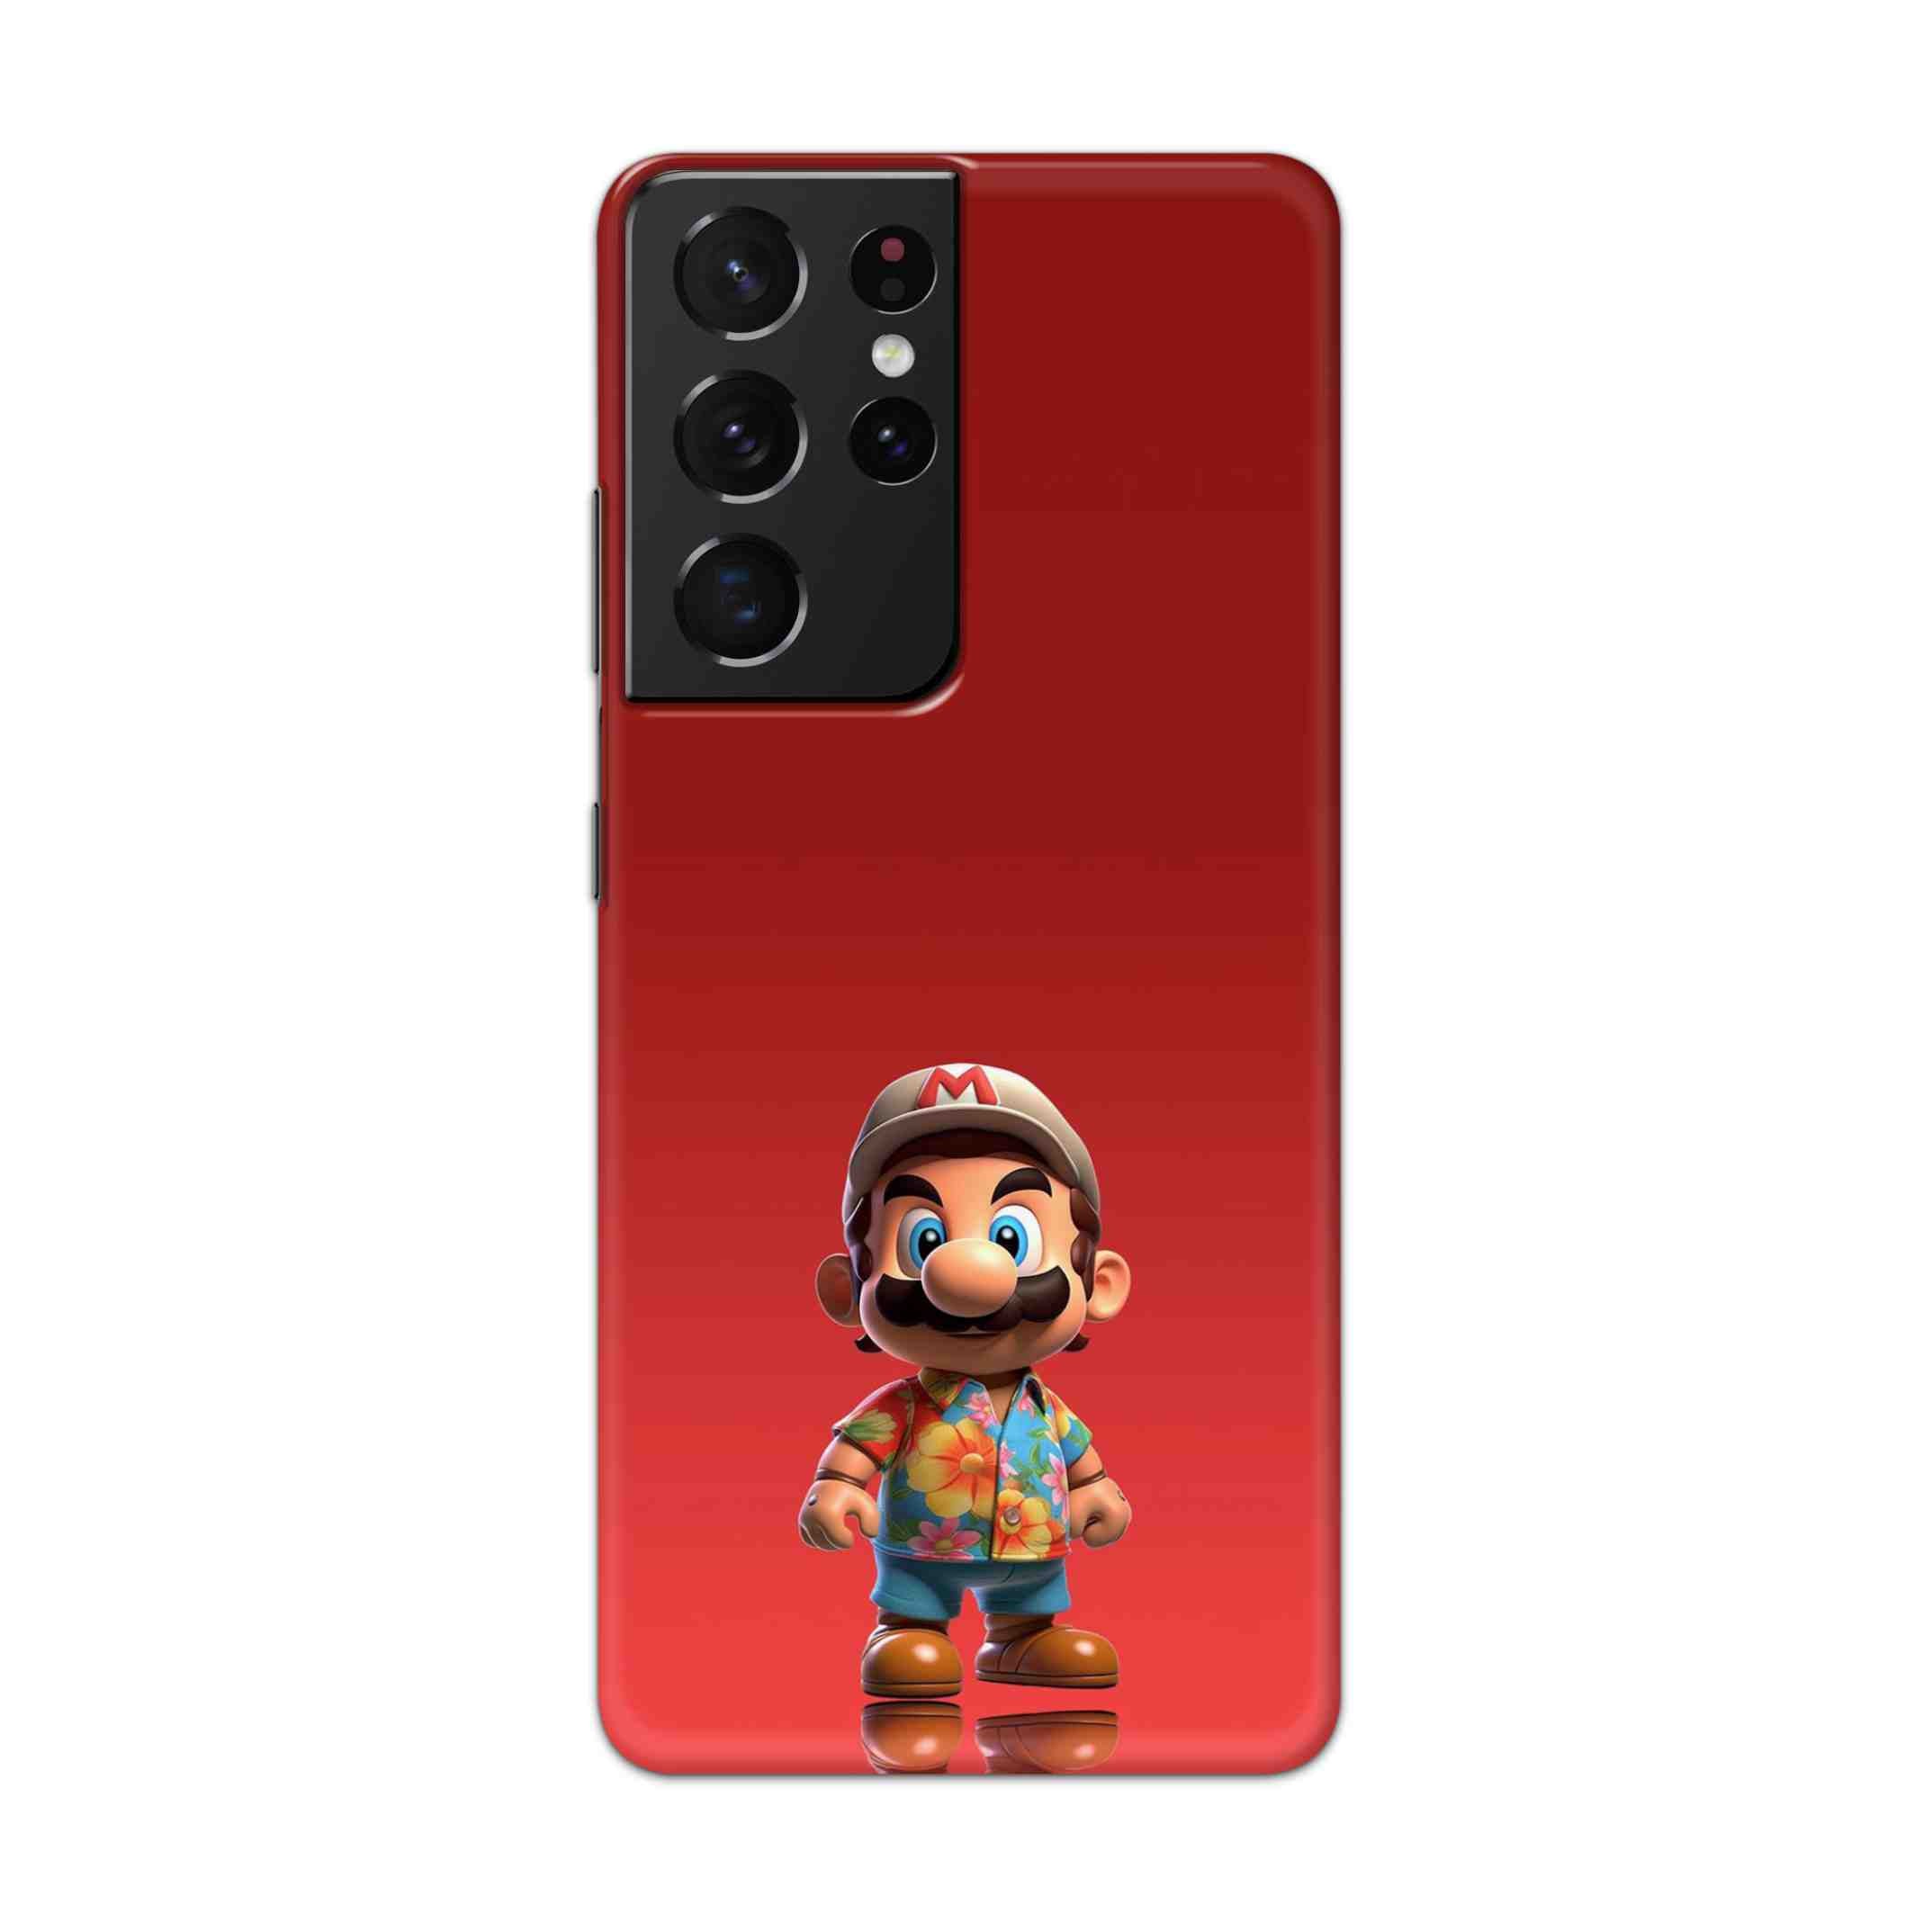 Buy Mario Hard Back Mobile Phone Case Cover For Samsung Galaxy S21 Ultra Online